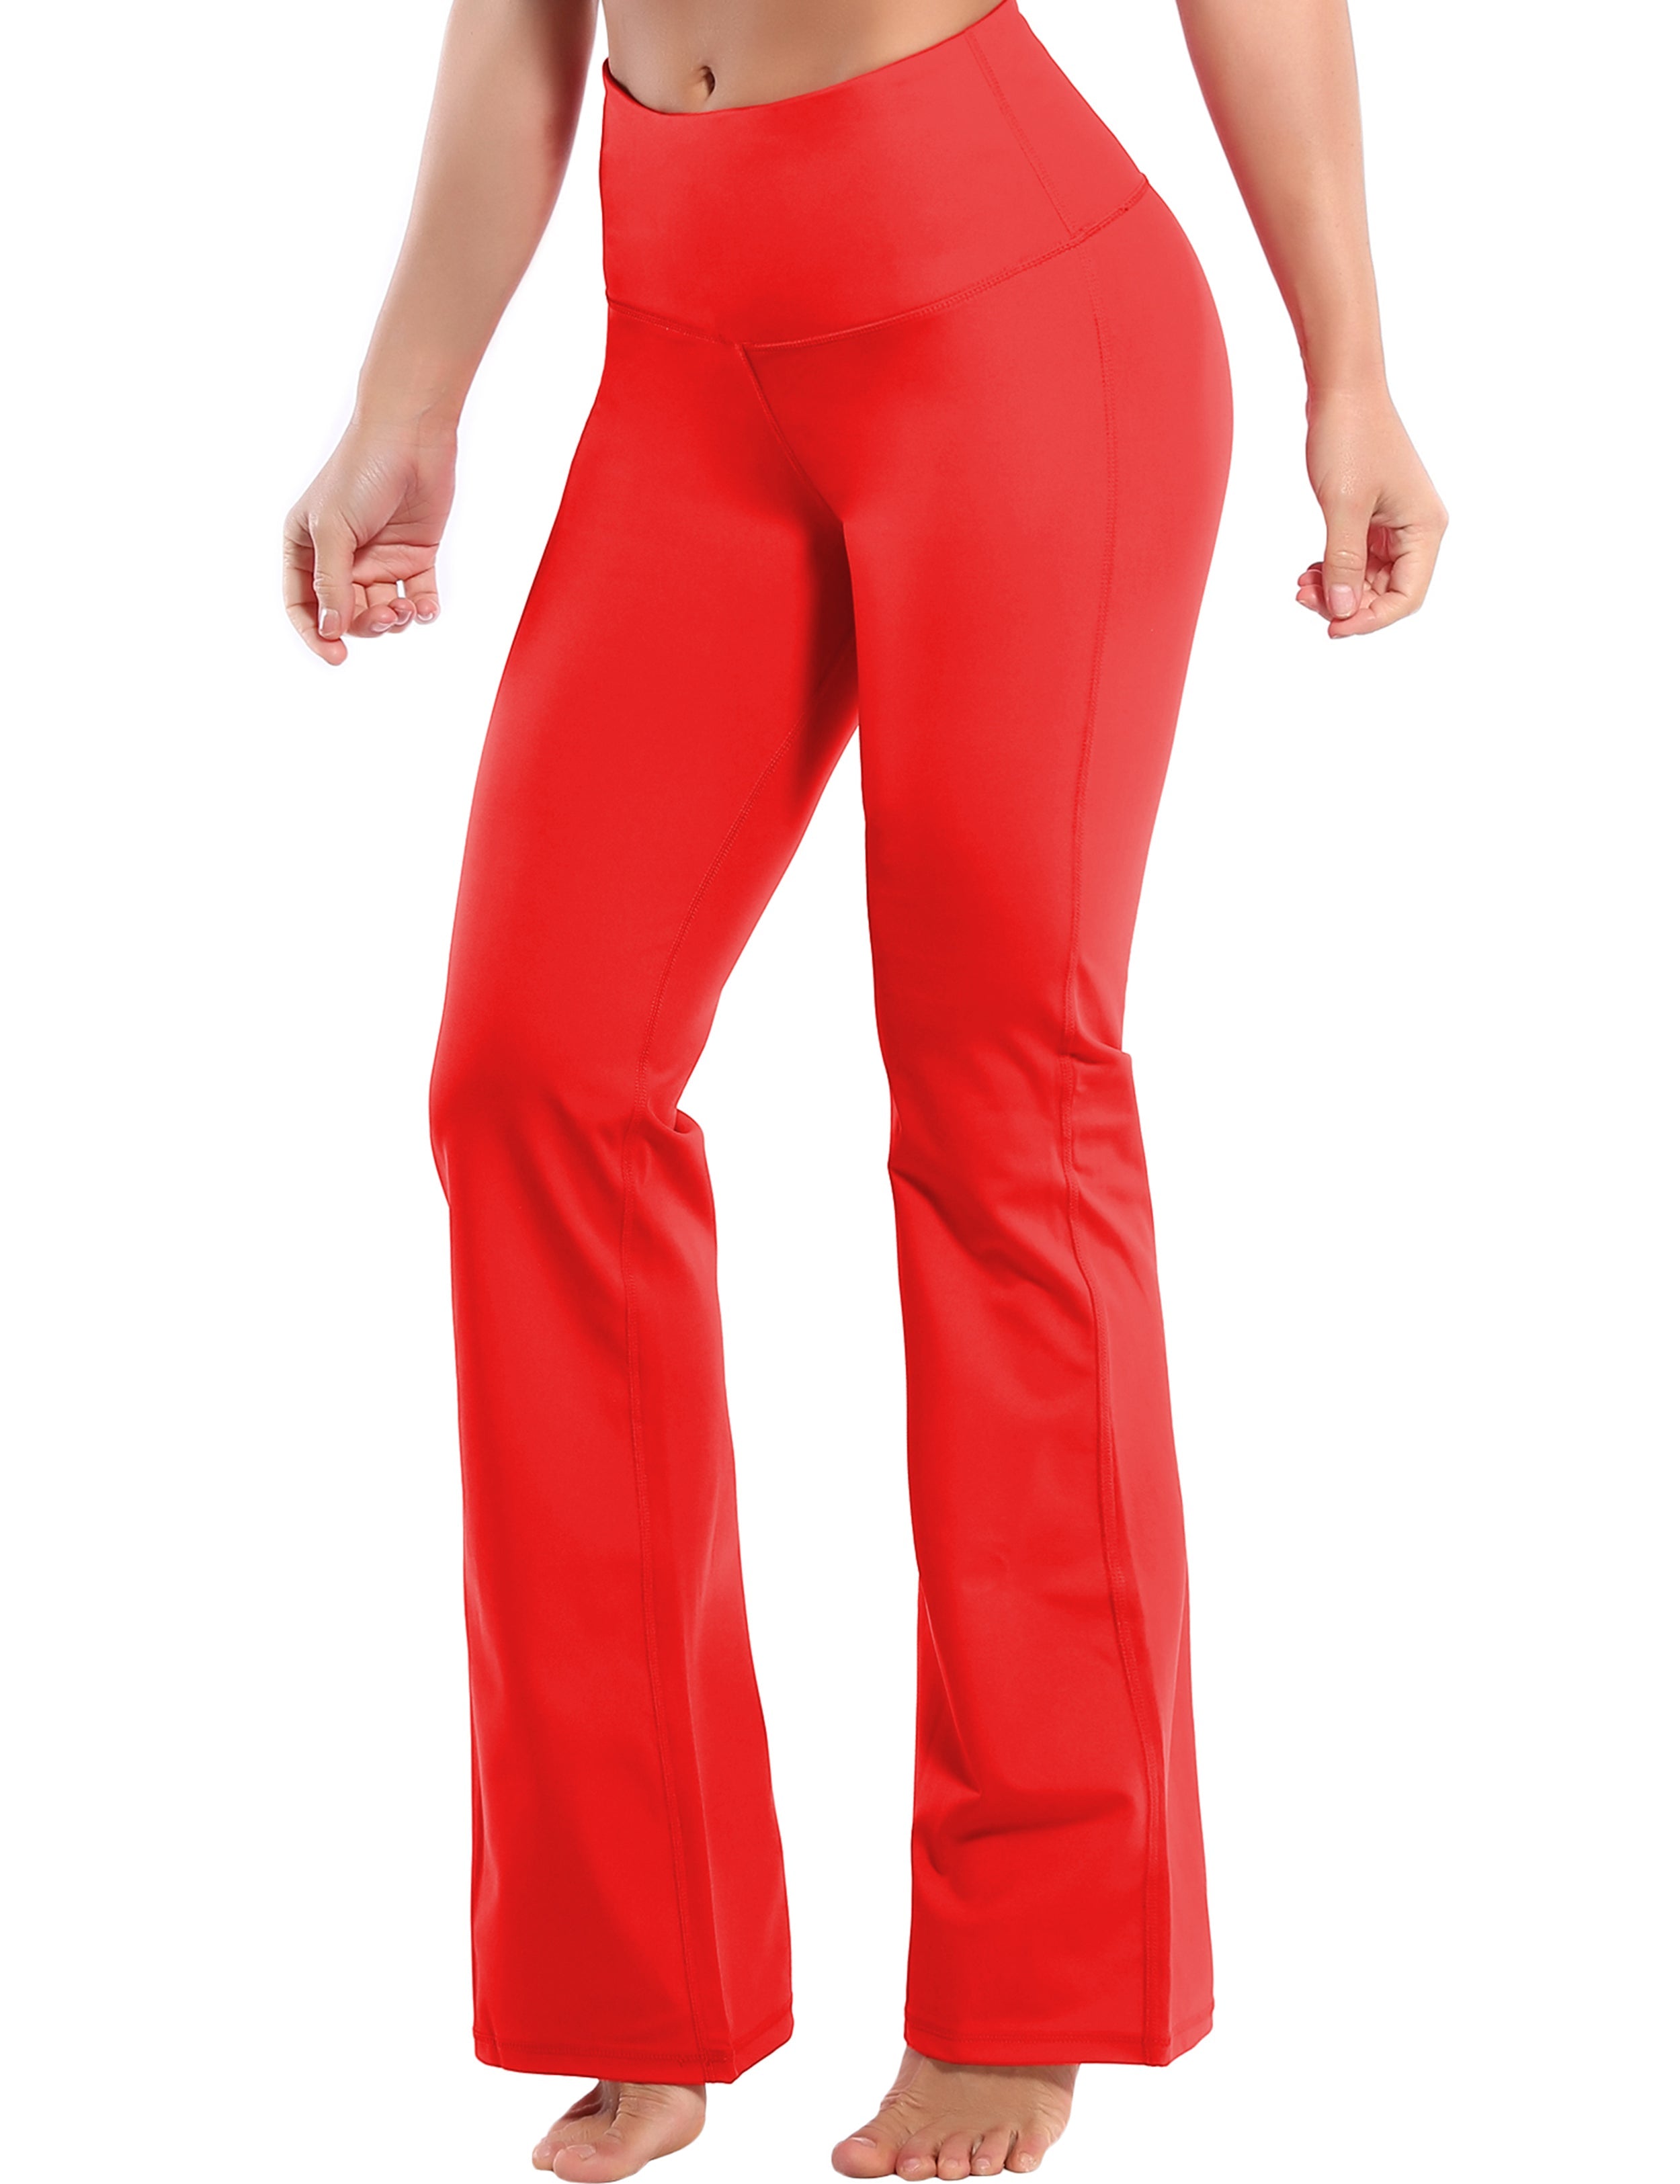 High Waist Bootcut Leggings Scarlet 75%Nylon/25%Spandex Fabric doesn't attract lint easily 4-way stretch No see-through Moisture-wicking Tummy control Inner pocket Five lengths